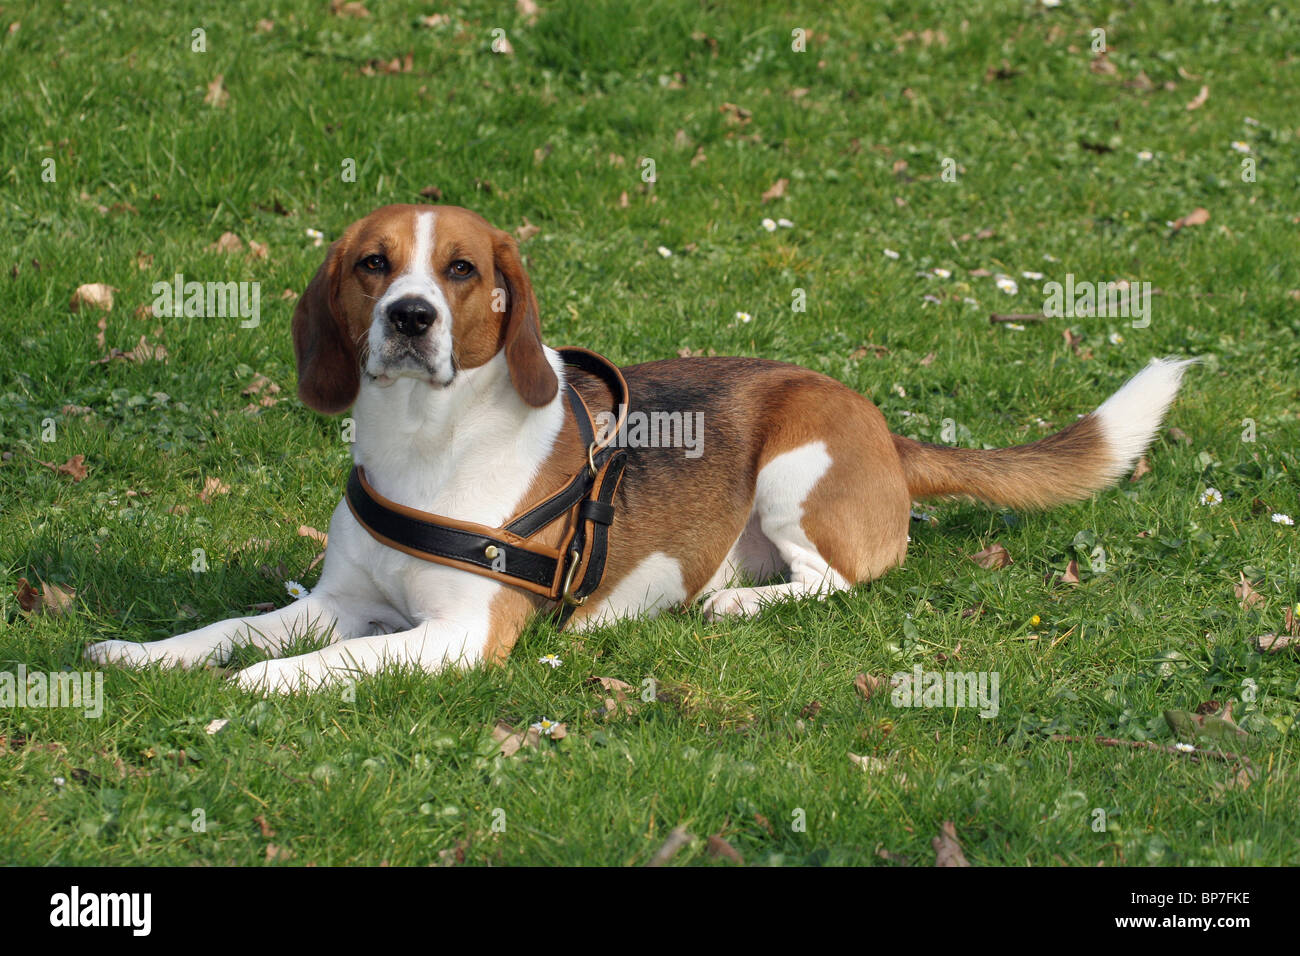 Beagle (Canis lupus familiaris) wearing a harness while lying on a lawn in an urban park. Stock Photo